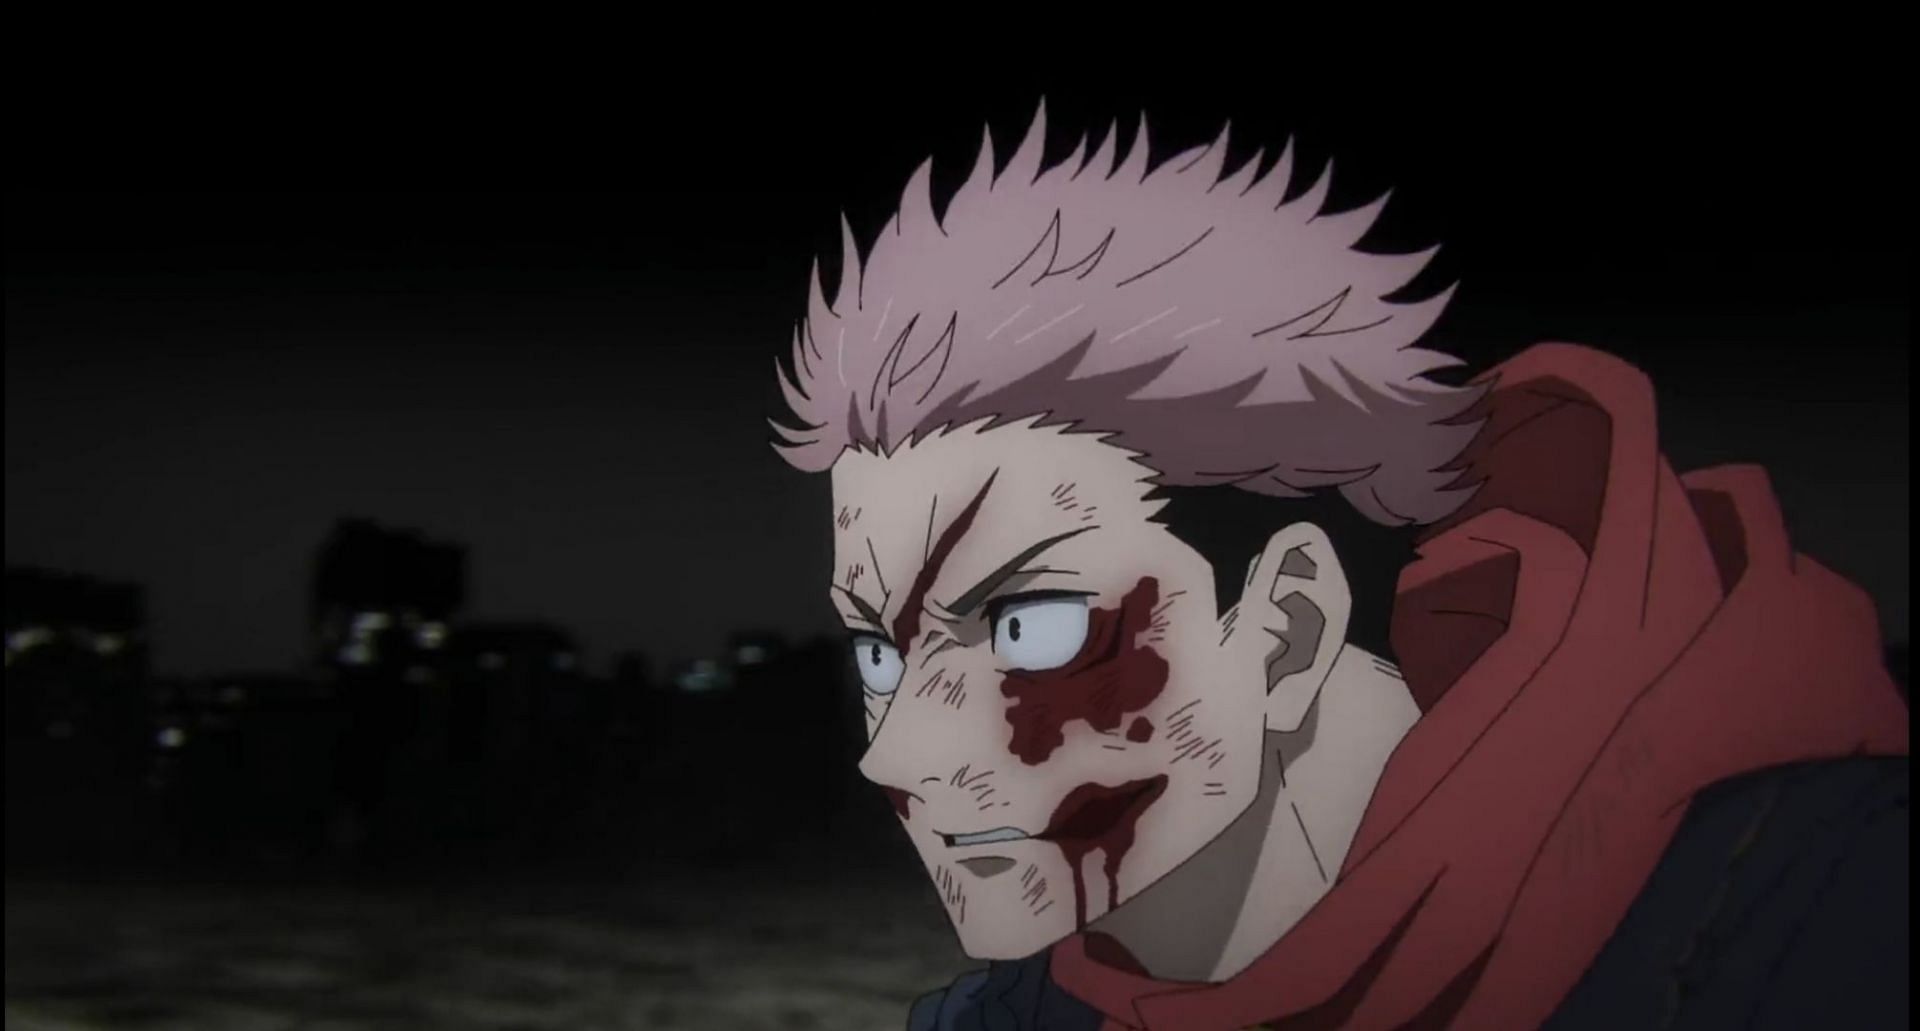 Jujutsu Kaisen chapter 247 release date and time(Image via MAPPA)